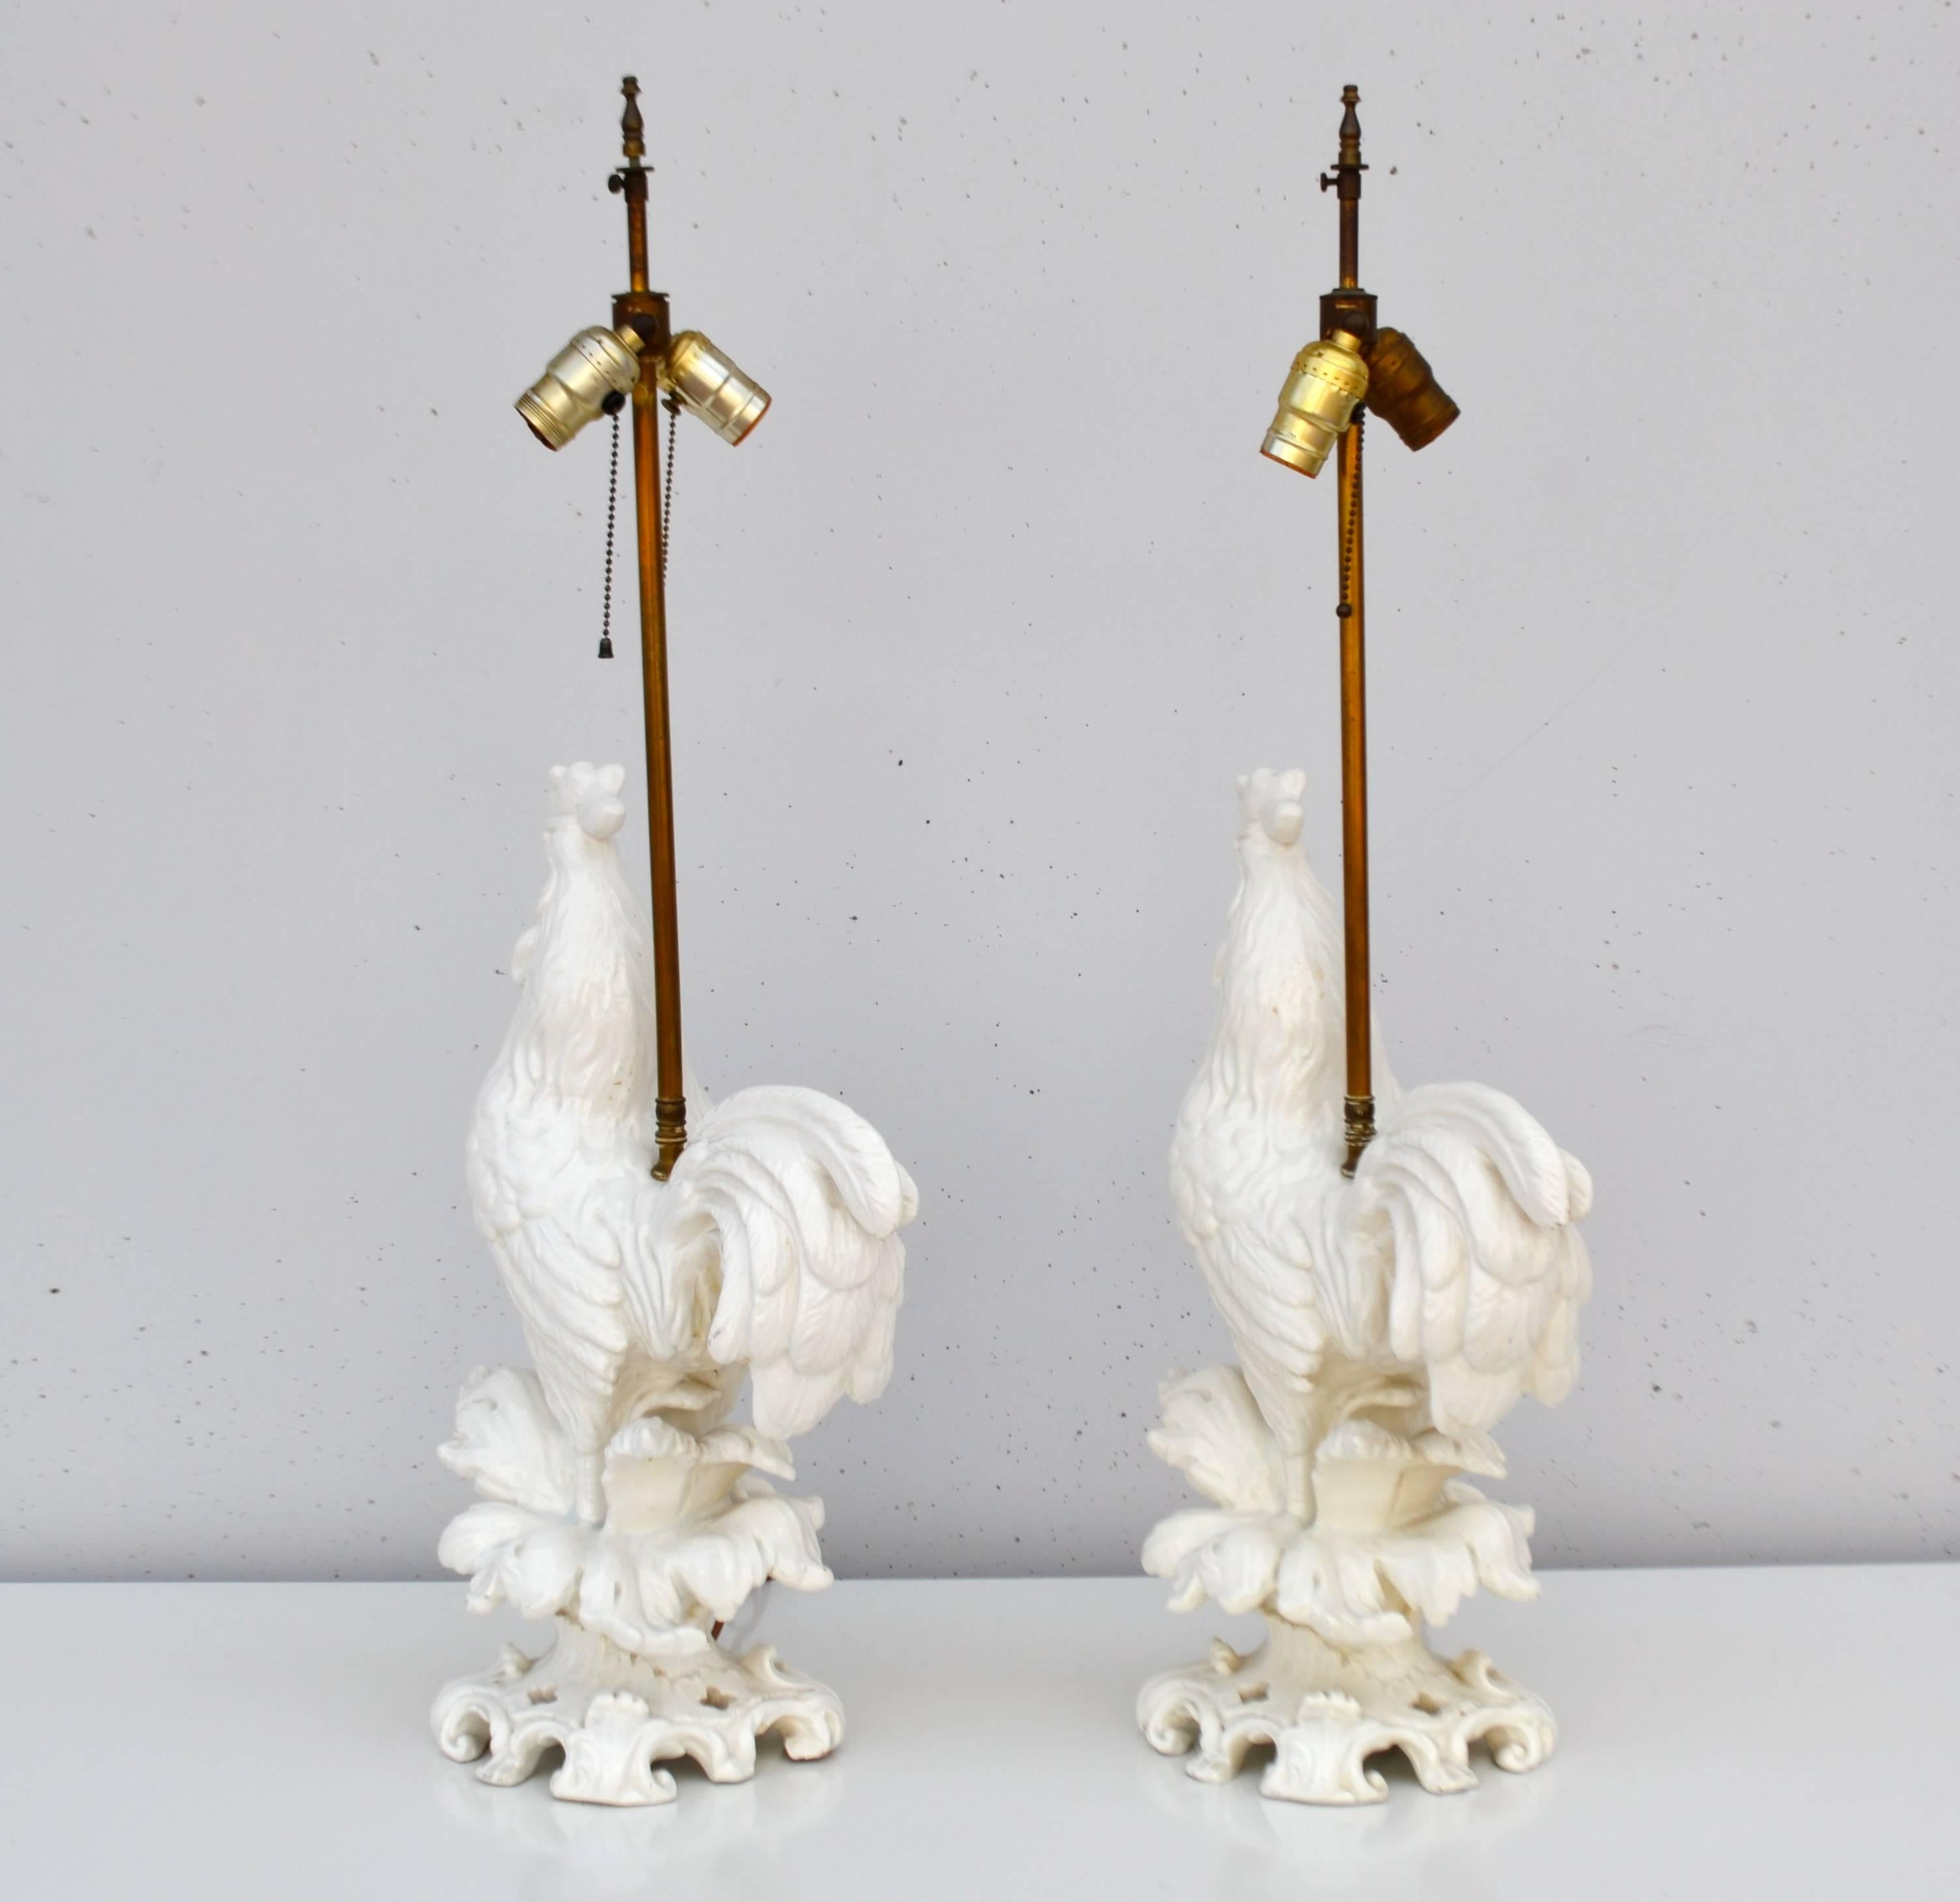 Pair of Midcentury Blanc de Chine Ceramic Rooster Form Table Lamps In Good Condition For Sale In West Palm Beach, FL